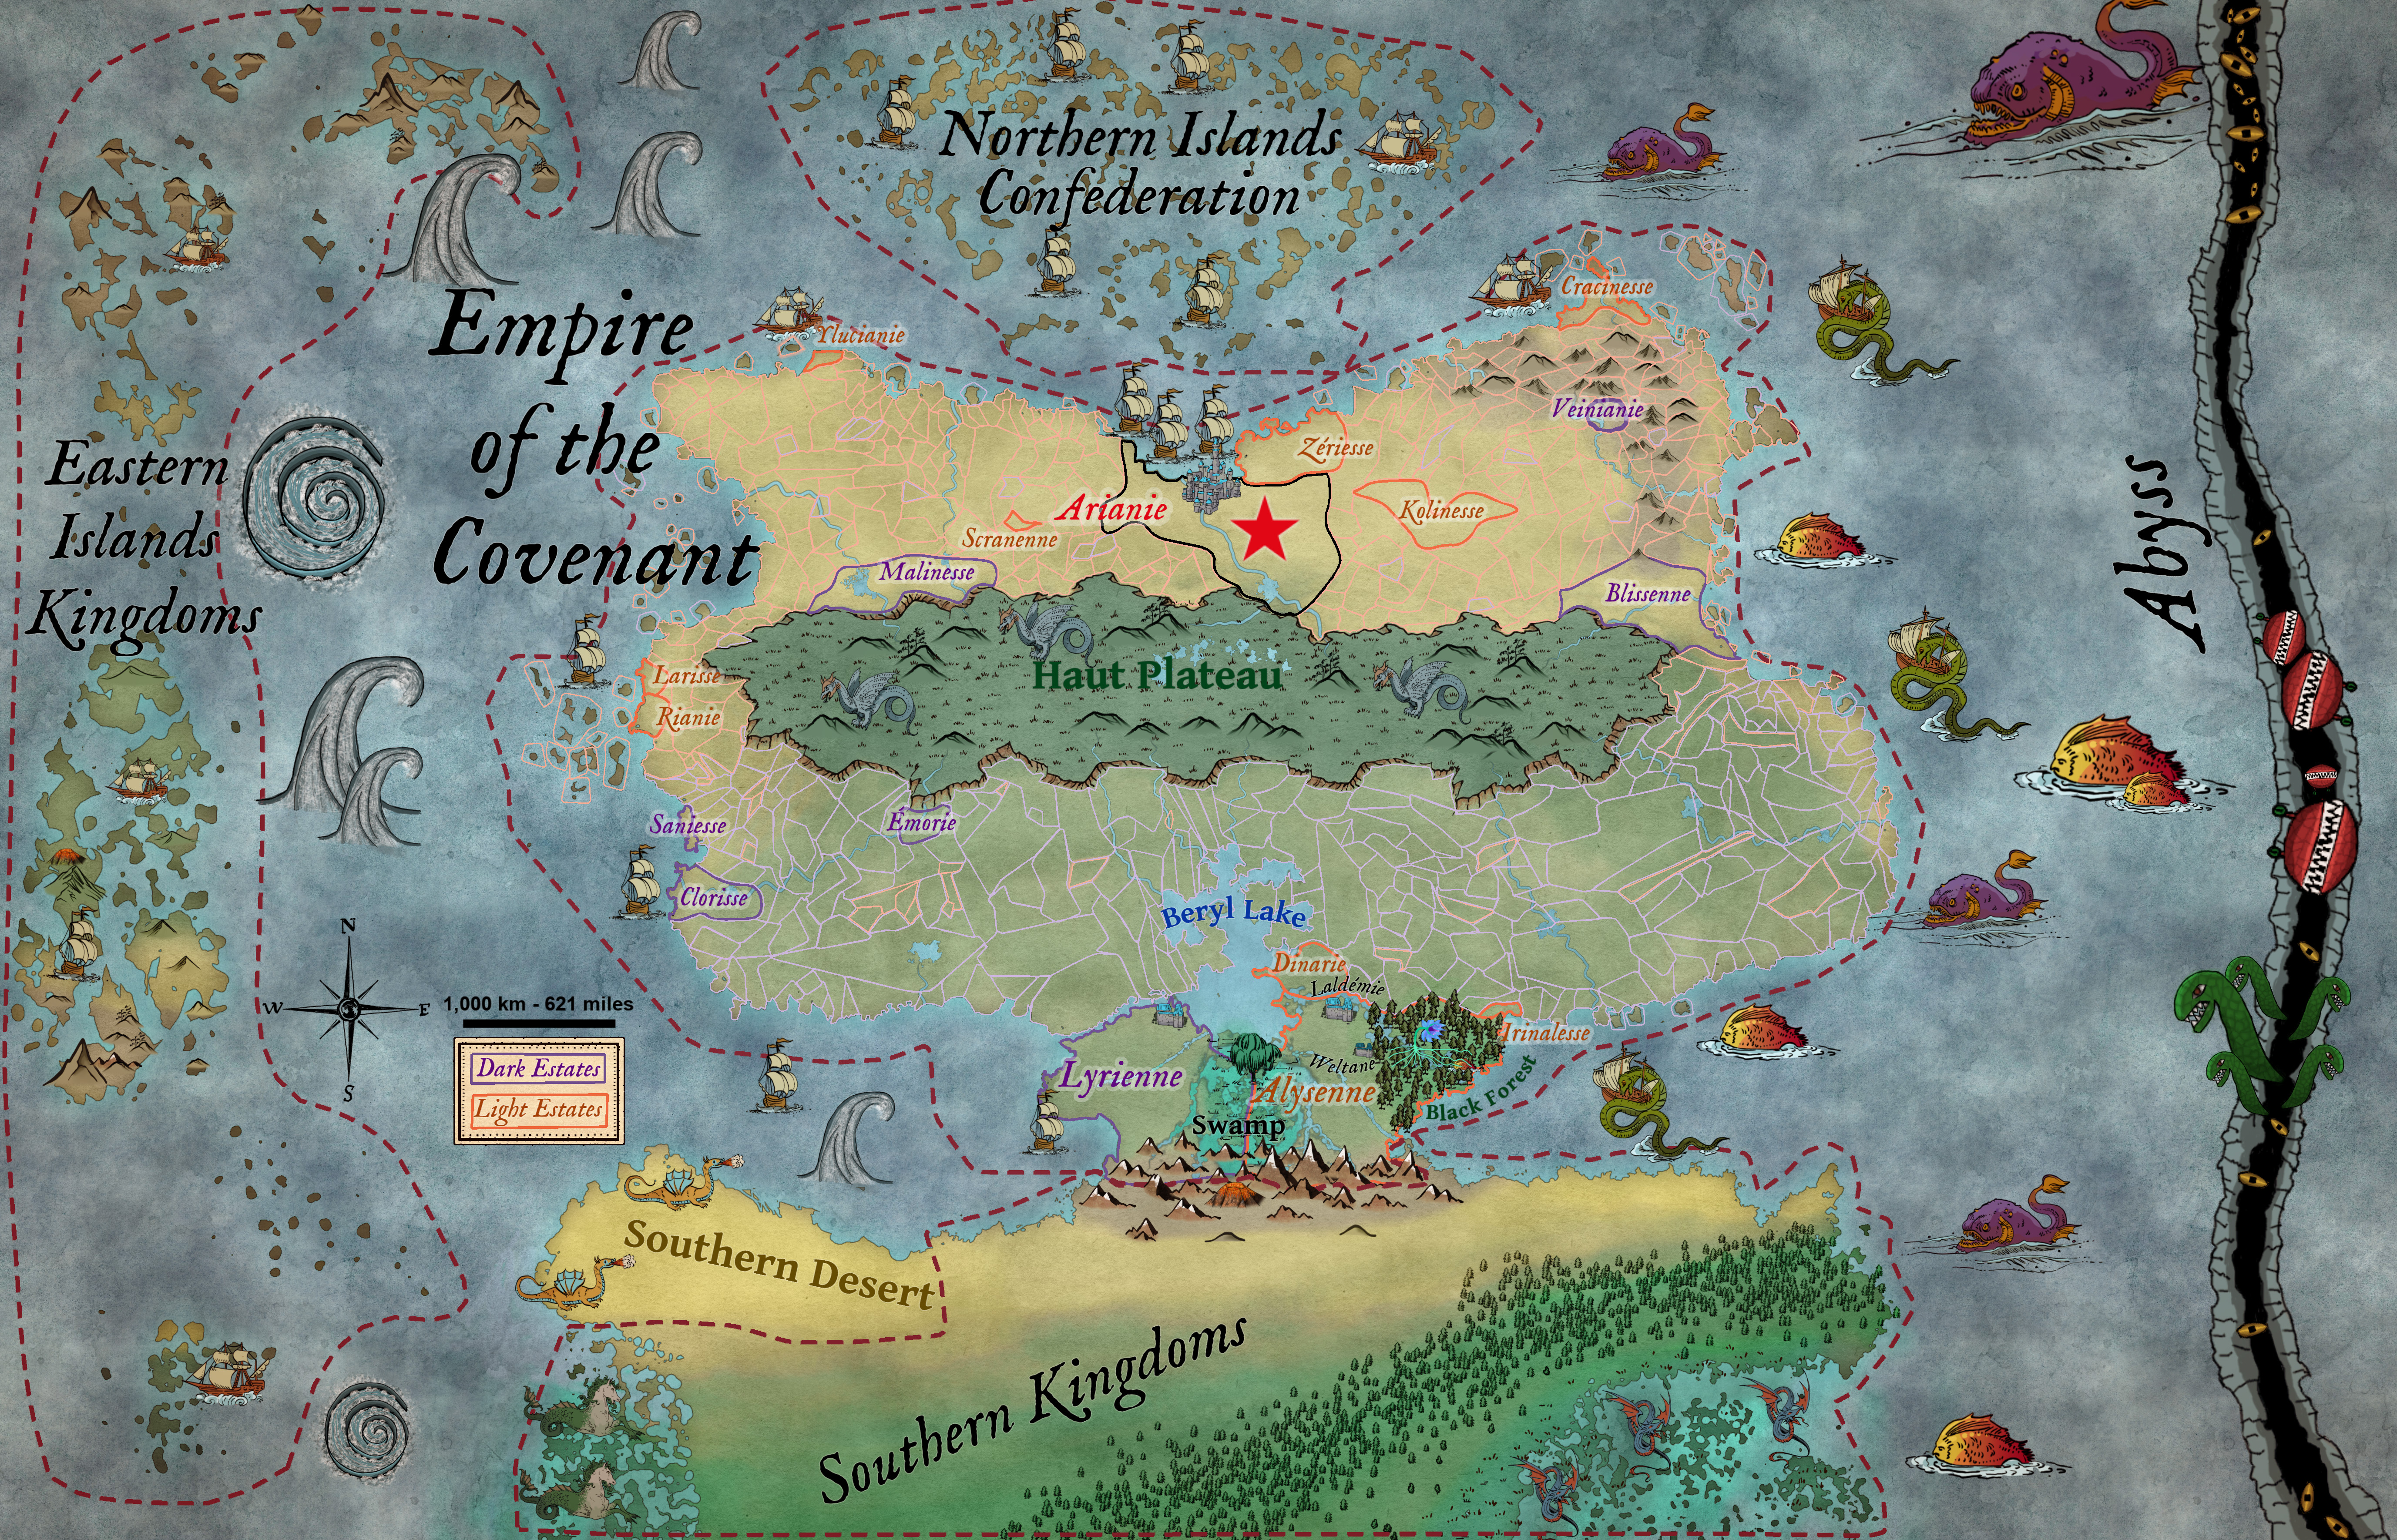 Map of the Empire of the Covenant Base Map Image